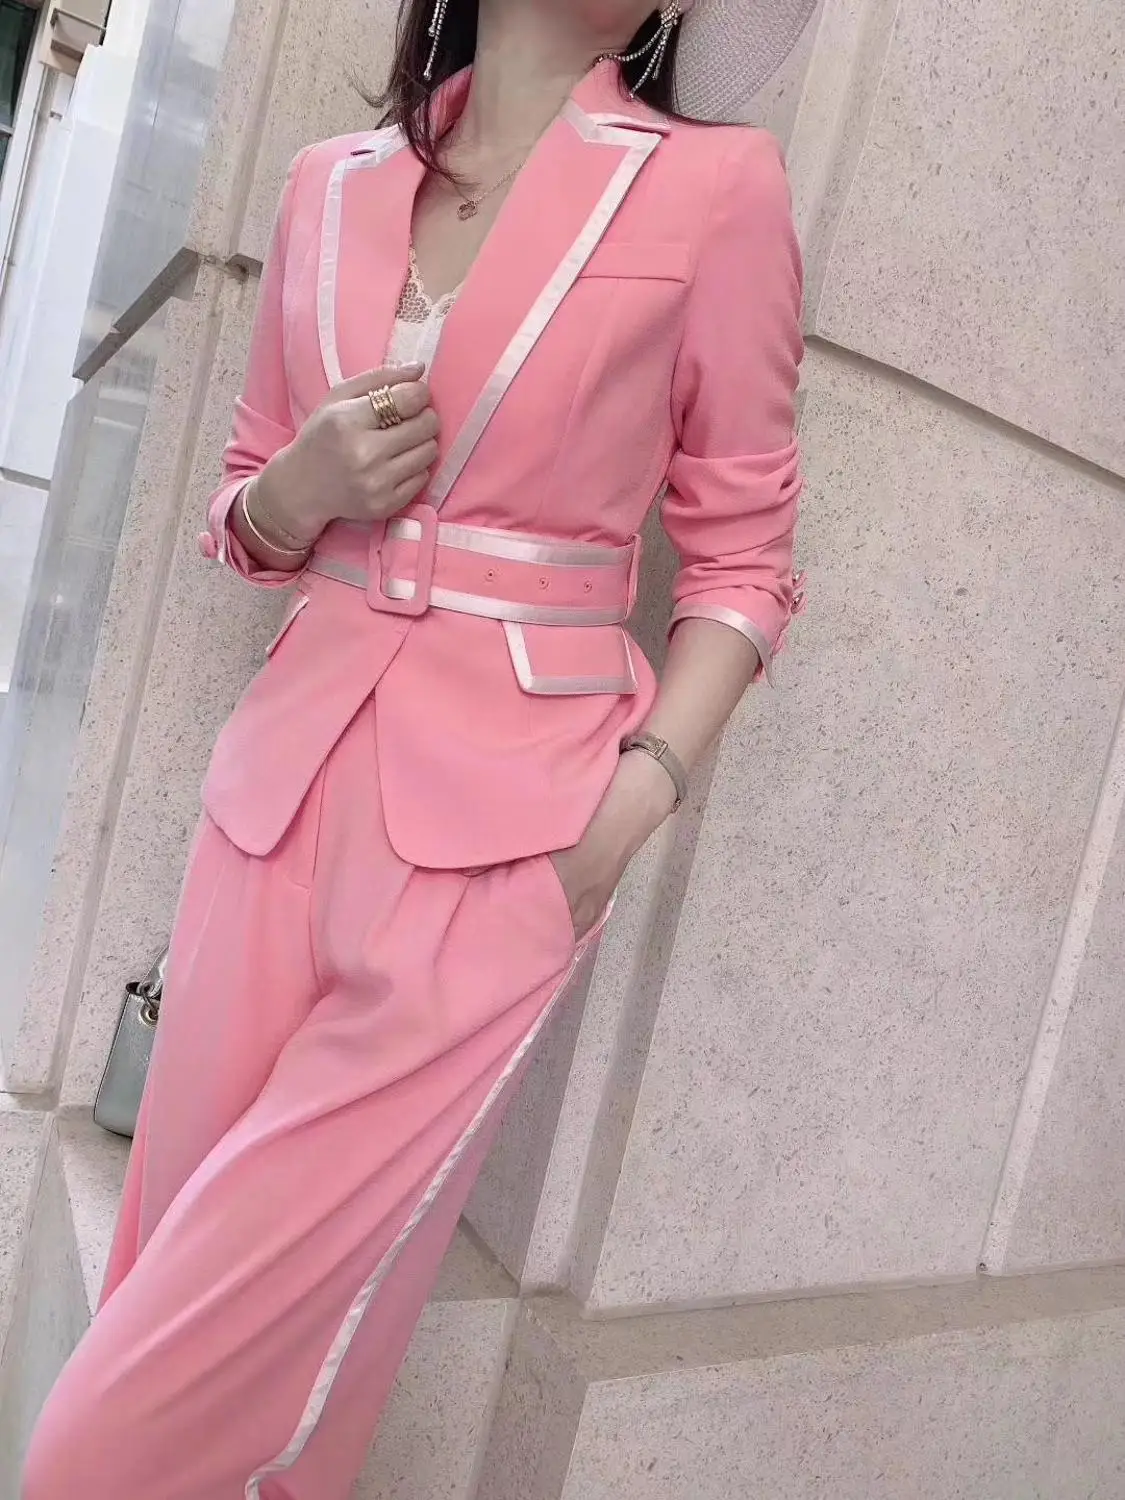 2020 Summer High Quality New Woman Pants Suit Pink Romantic Style Silver Edge Notched Silver Edge Belt Lady Suit